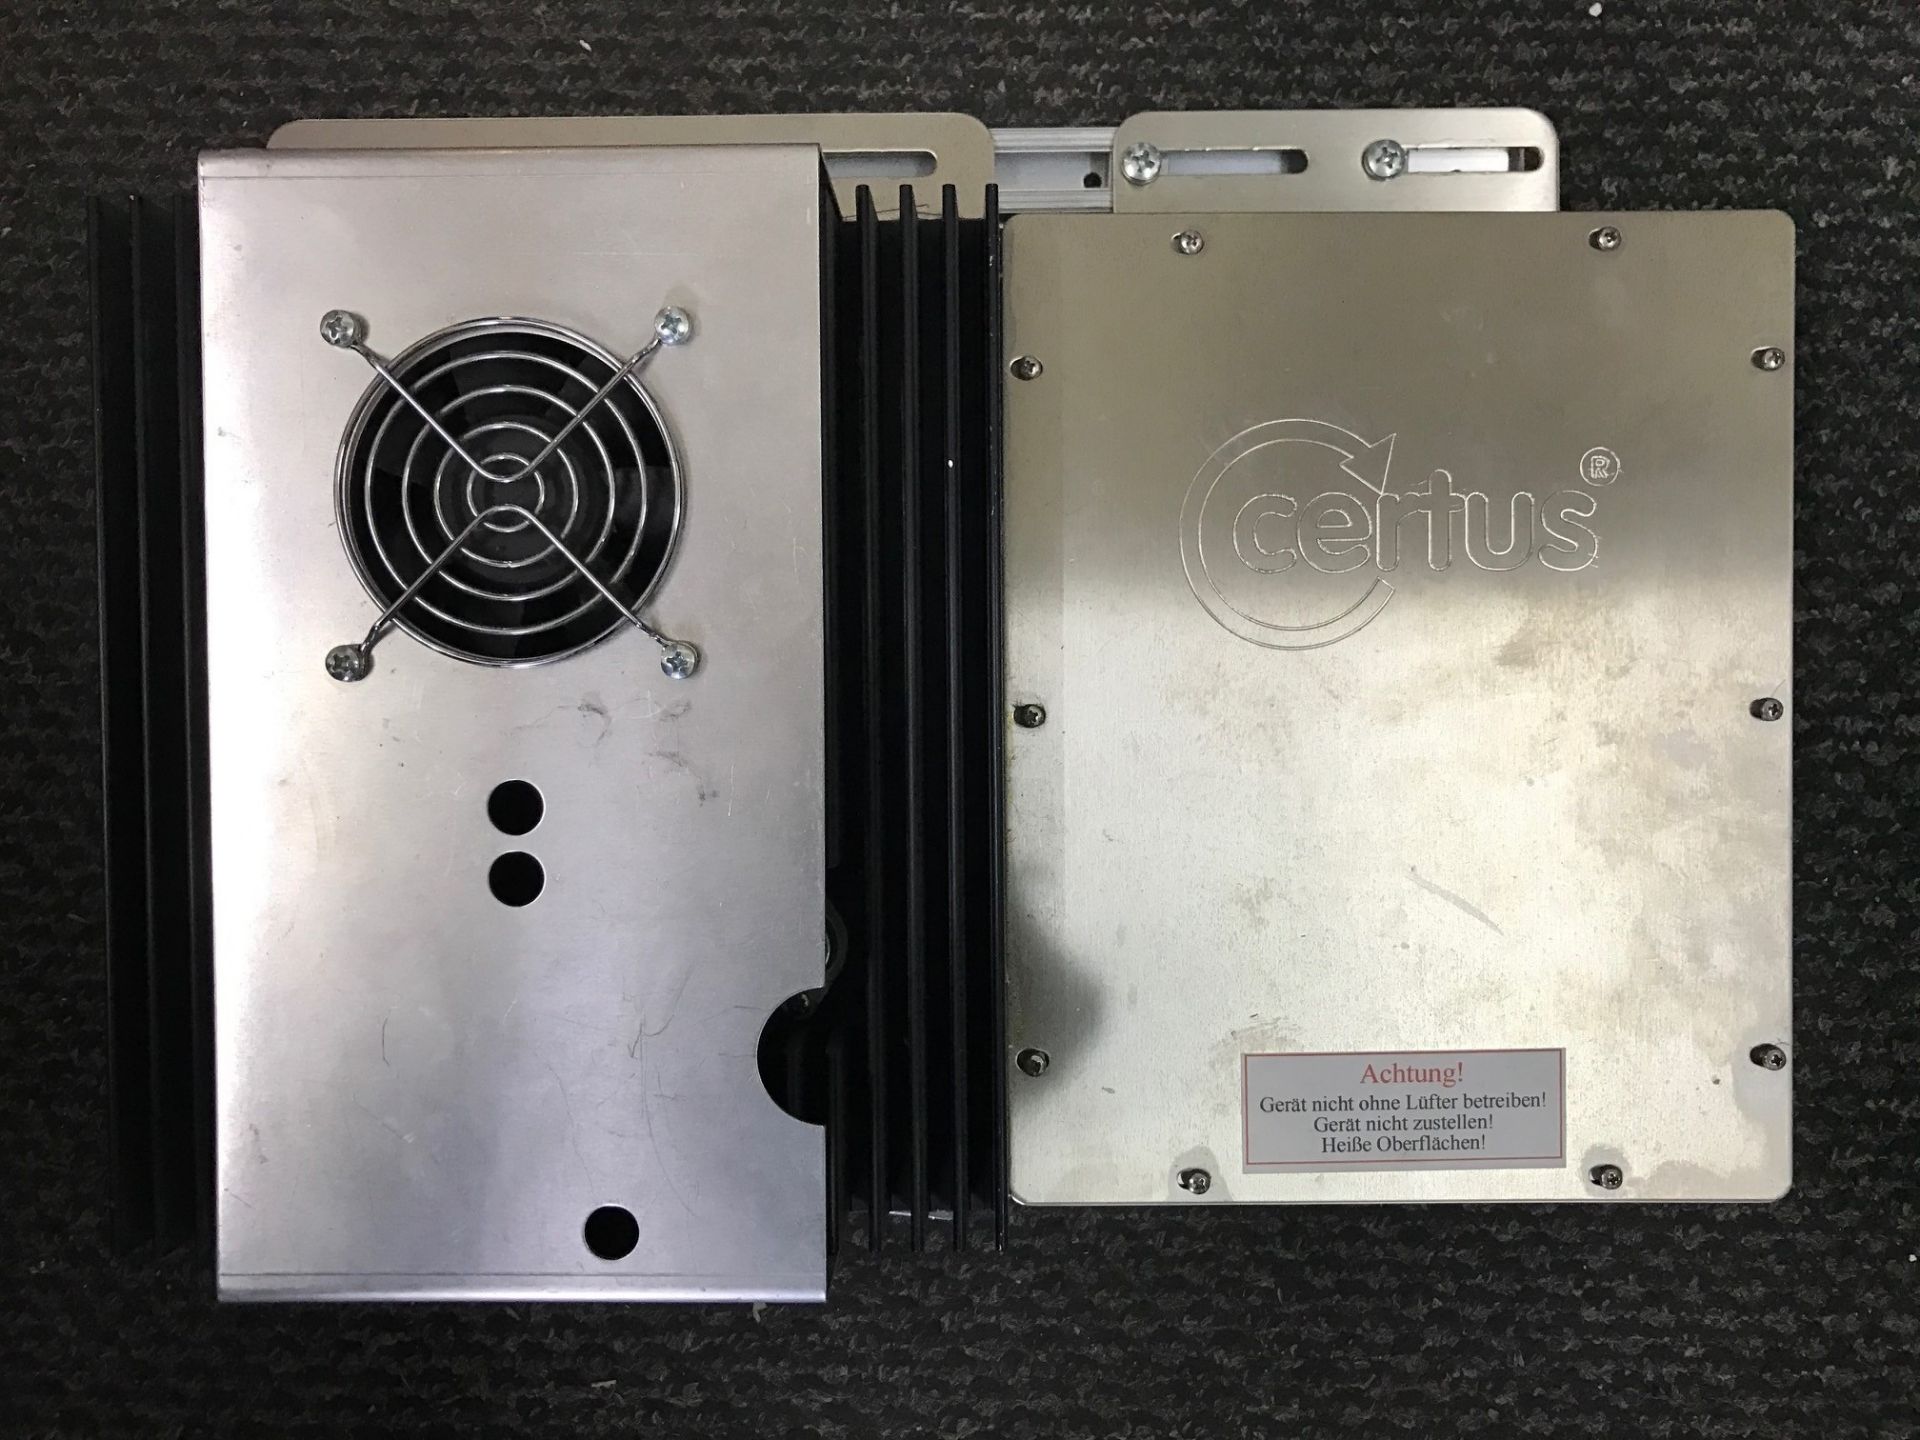 Certus Security System - 3 Tag Barriers/Control Unit, Large Amount of Tags Included - Retail Shop - Image 3 of 4